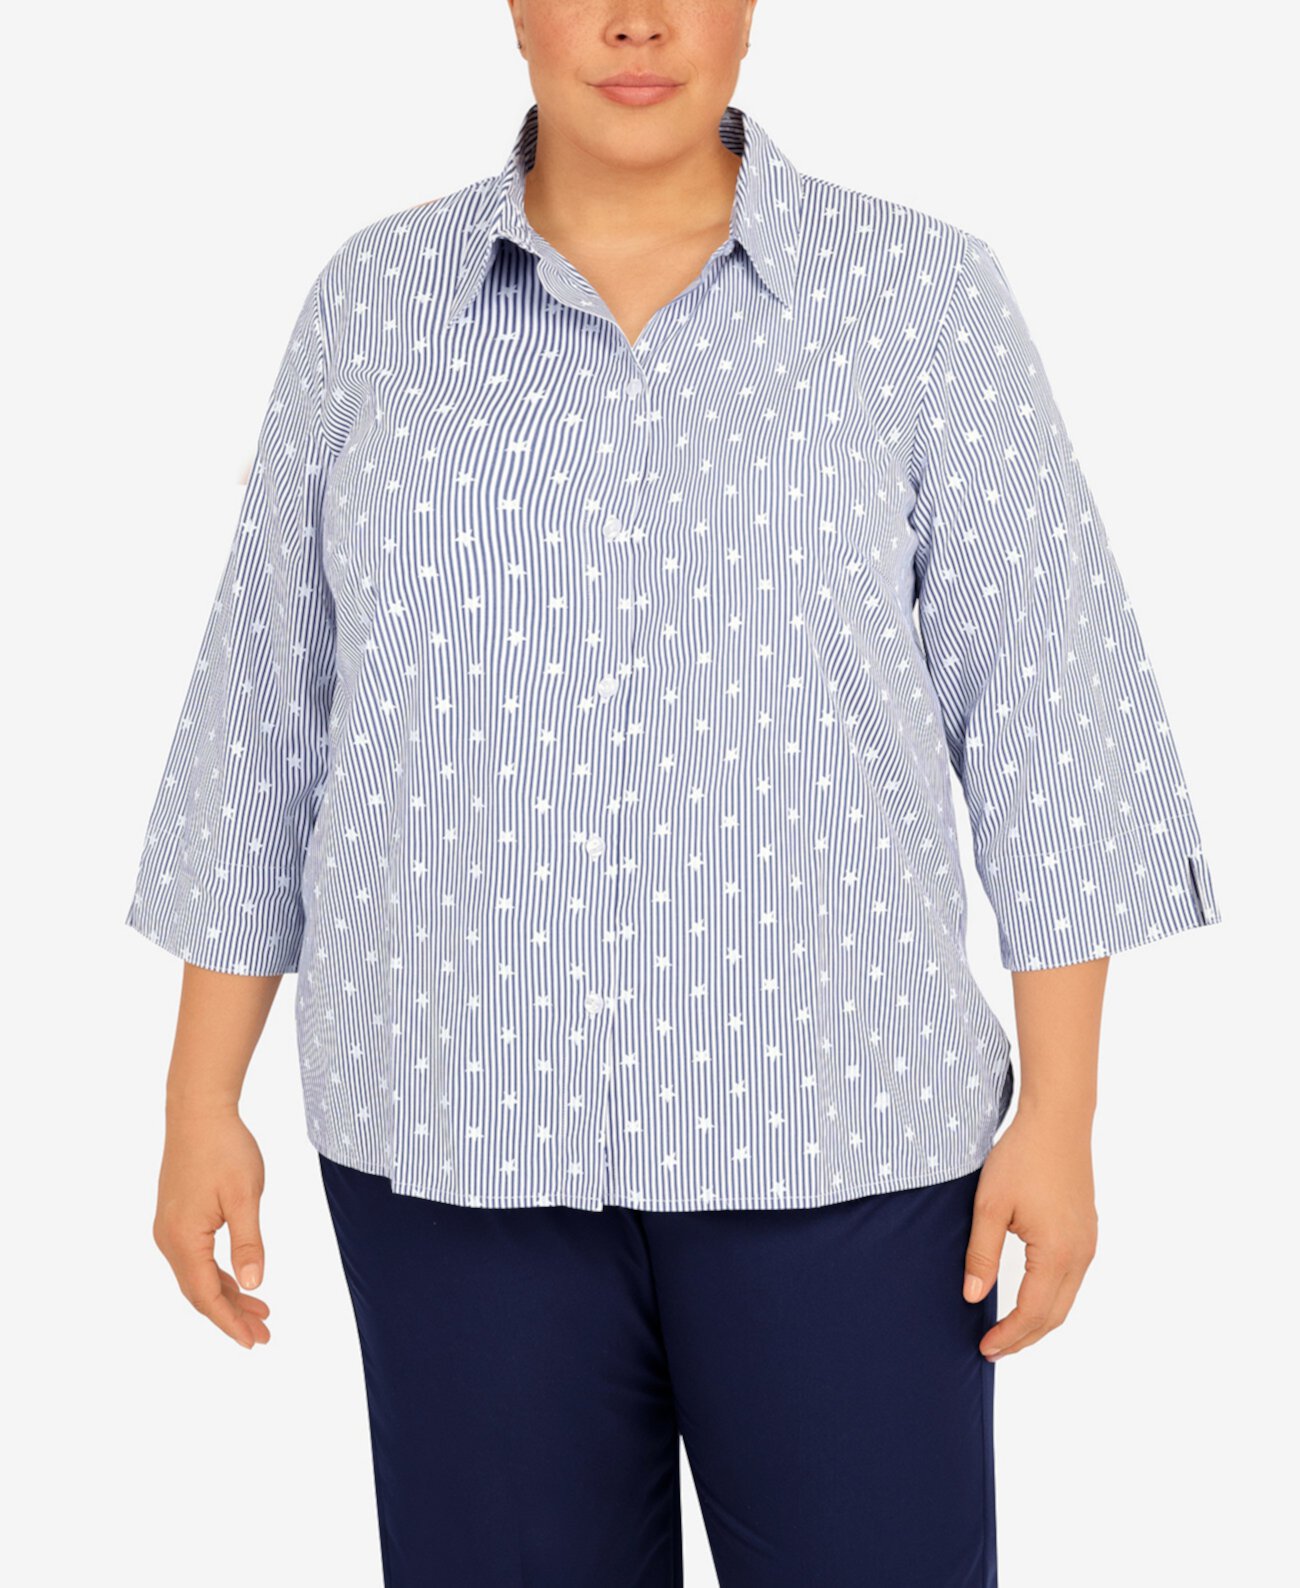 Plus Size Stars On Stripe Button Down Top Alfred Dunner